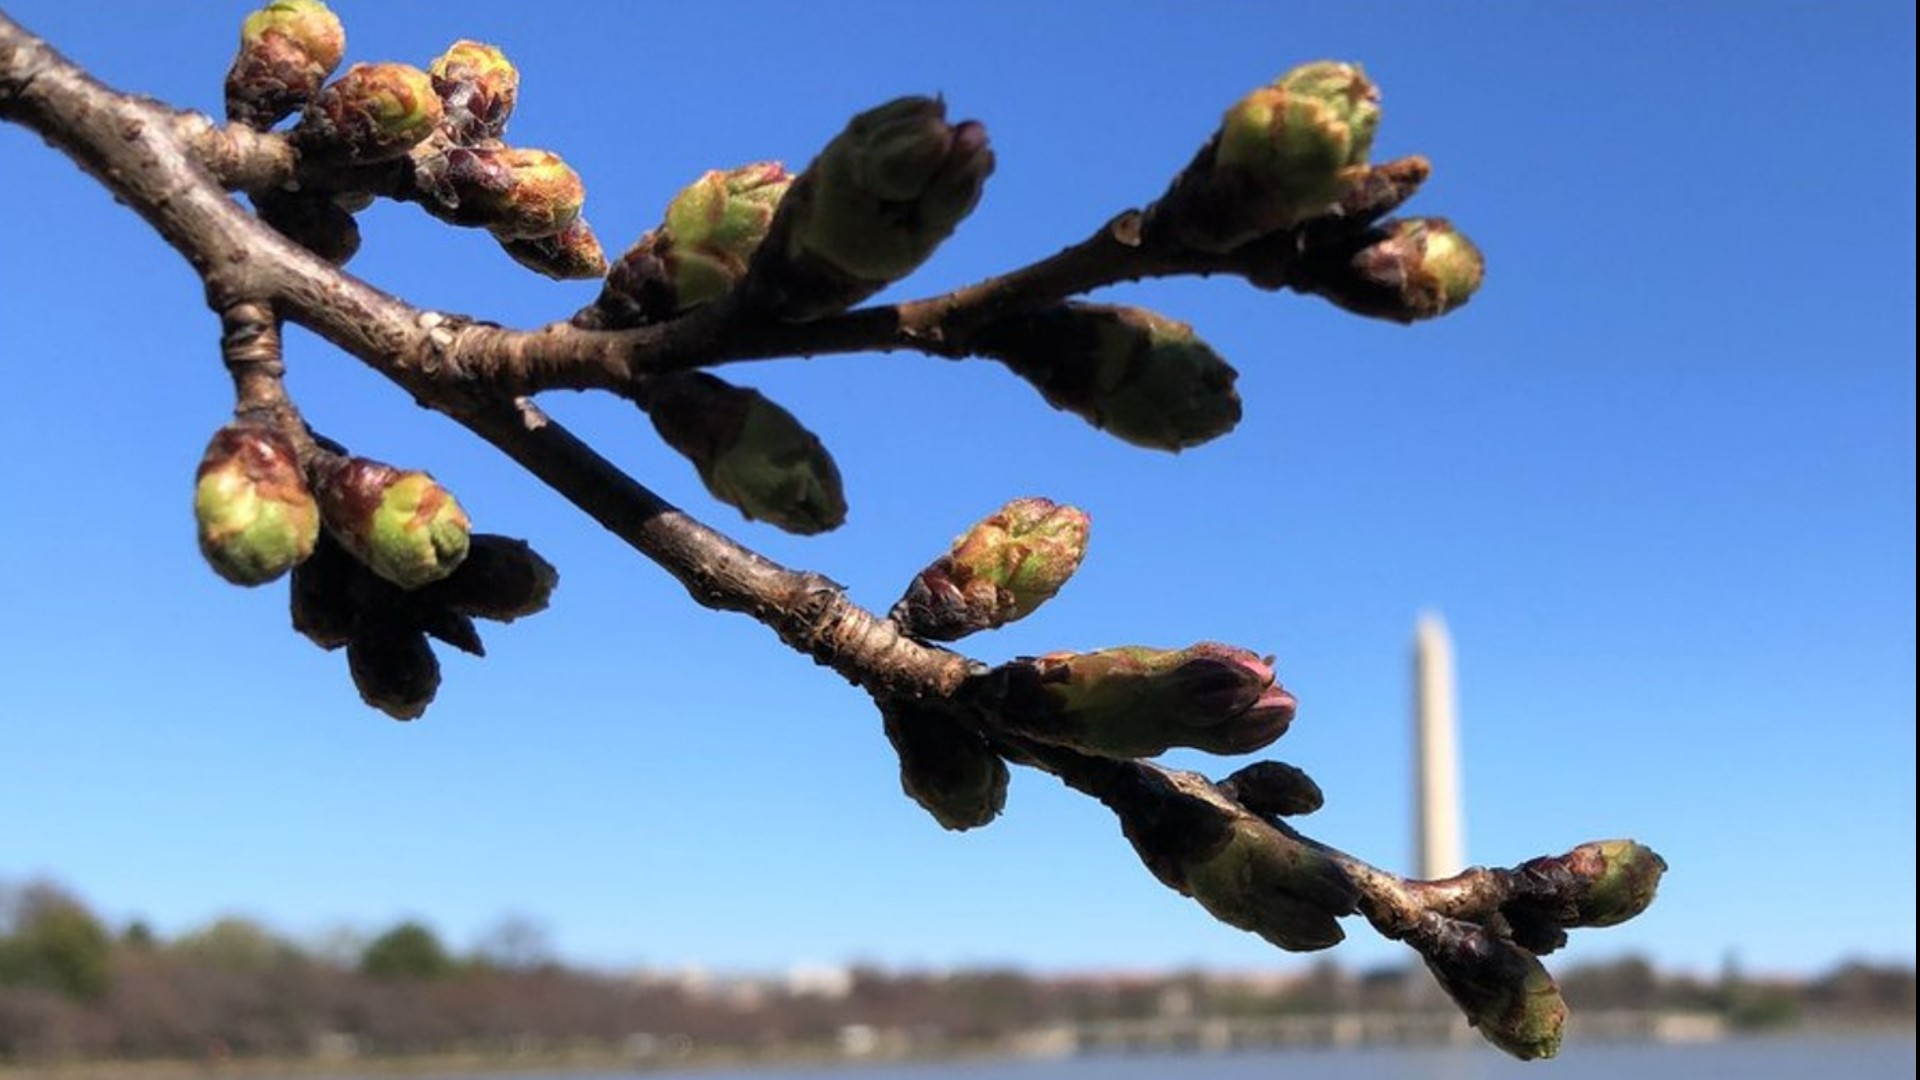 The D.C. cherry blossoms are moving along, and we've officially reached stage 3 on Friday – which is halfway to peak bloom.